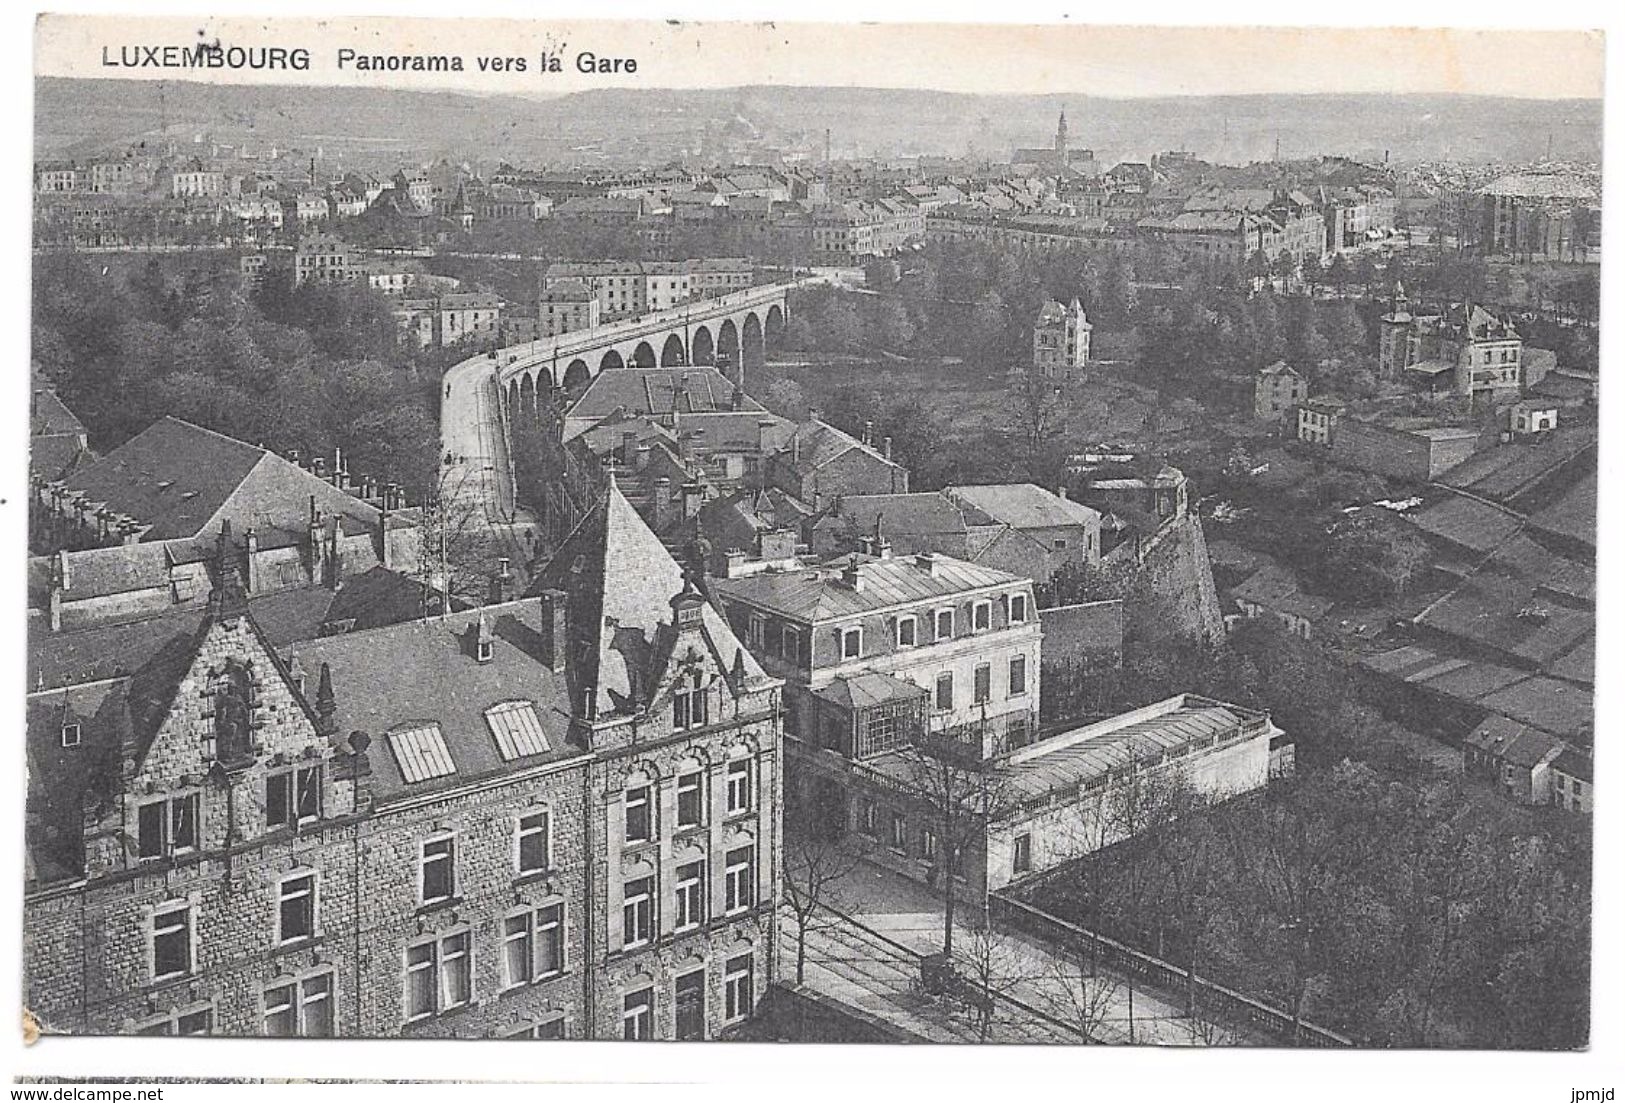 LUXEMBOURG - Panorama Vers La Gare - Ed. P. Houstraas No 582 - 1913 - Luxembourg - Ville